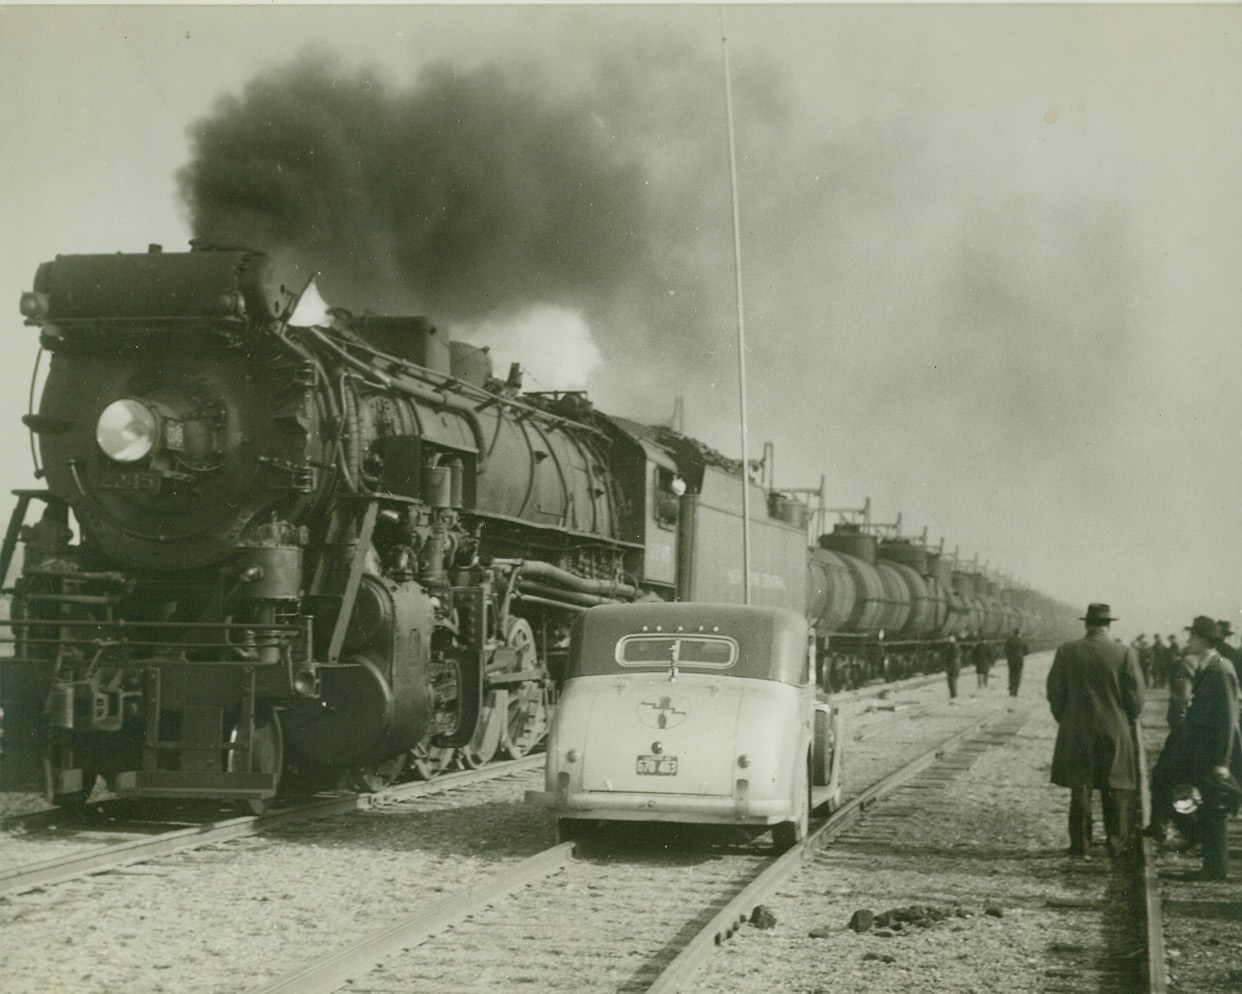 FIRST LOAD OF OIL LEAVES FOR EAST, 2/20/1943. NORRIS CITY, ILL.: Ninety-six tank cars loaded with oil at the local terminal of new Texas-Illinois Pipeline, are shown made up into the first train to leave the terminal for the petroleum starved East Coast. Formal ceremonies were held at the opening of the service. The 24-inch pipe line will be extended from here to New York and Philadelphia in the near future, but the pipe-rail system will relieve present shortage in the East until the entire line is completed. Credit: OWI Radiophoto from ACME;